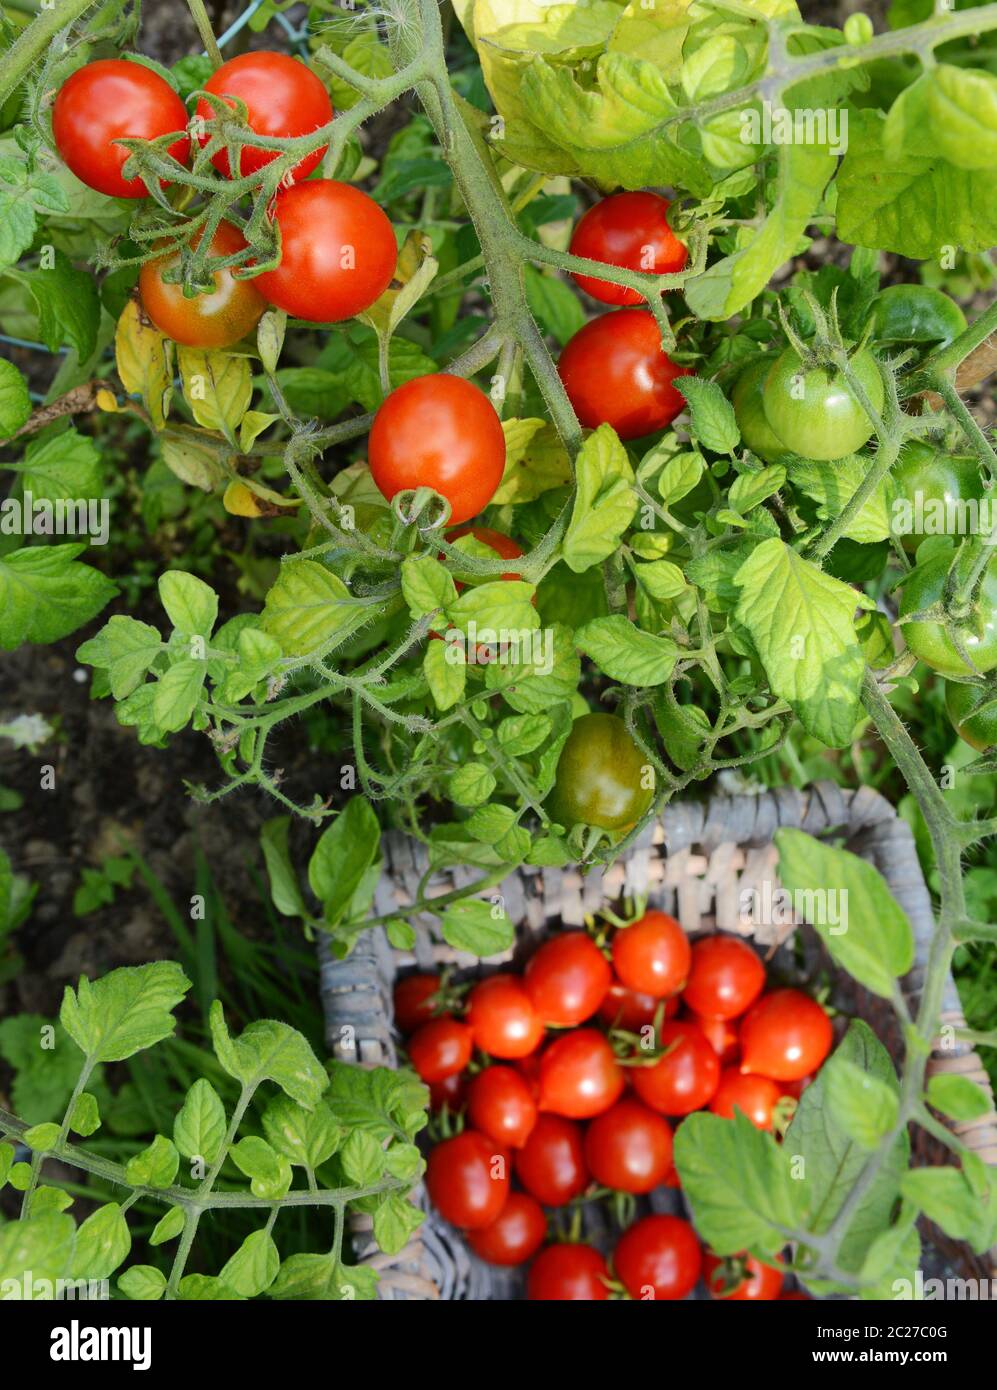 Plump red tomatoes on the vine, above a basket full of harvested tomatoes below Stock Photo